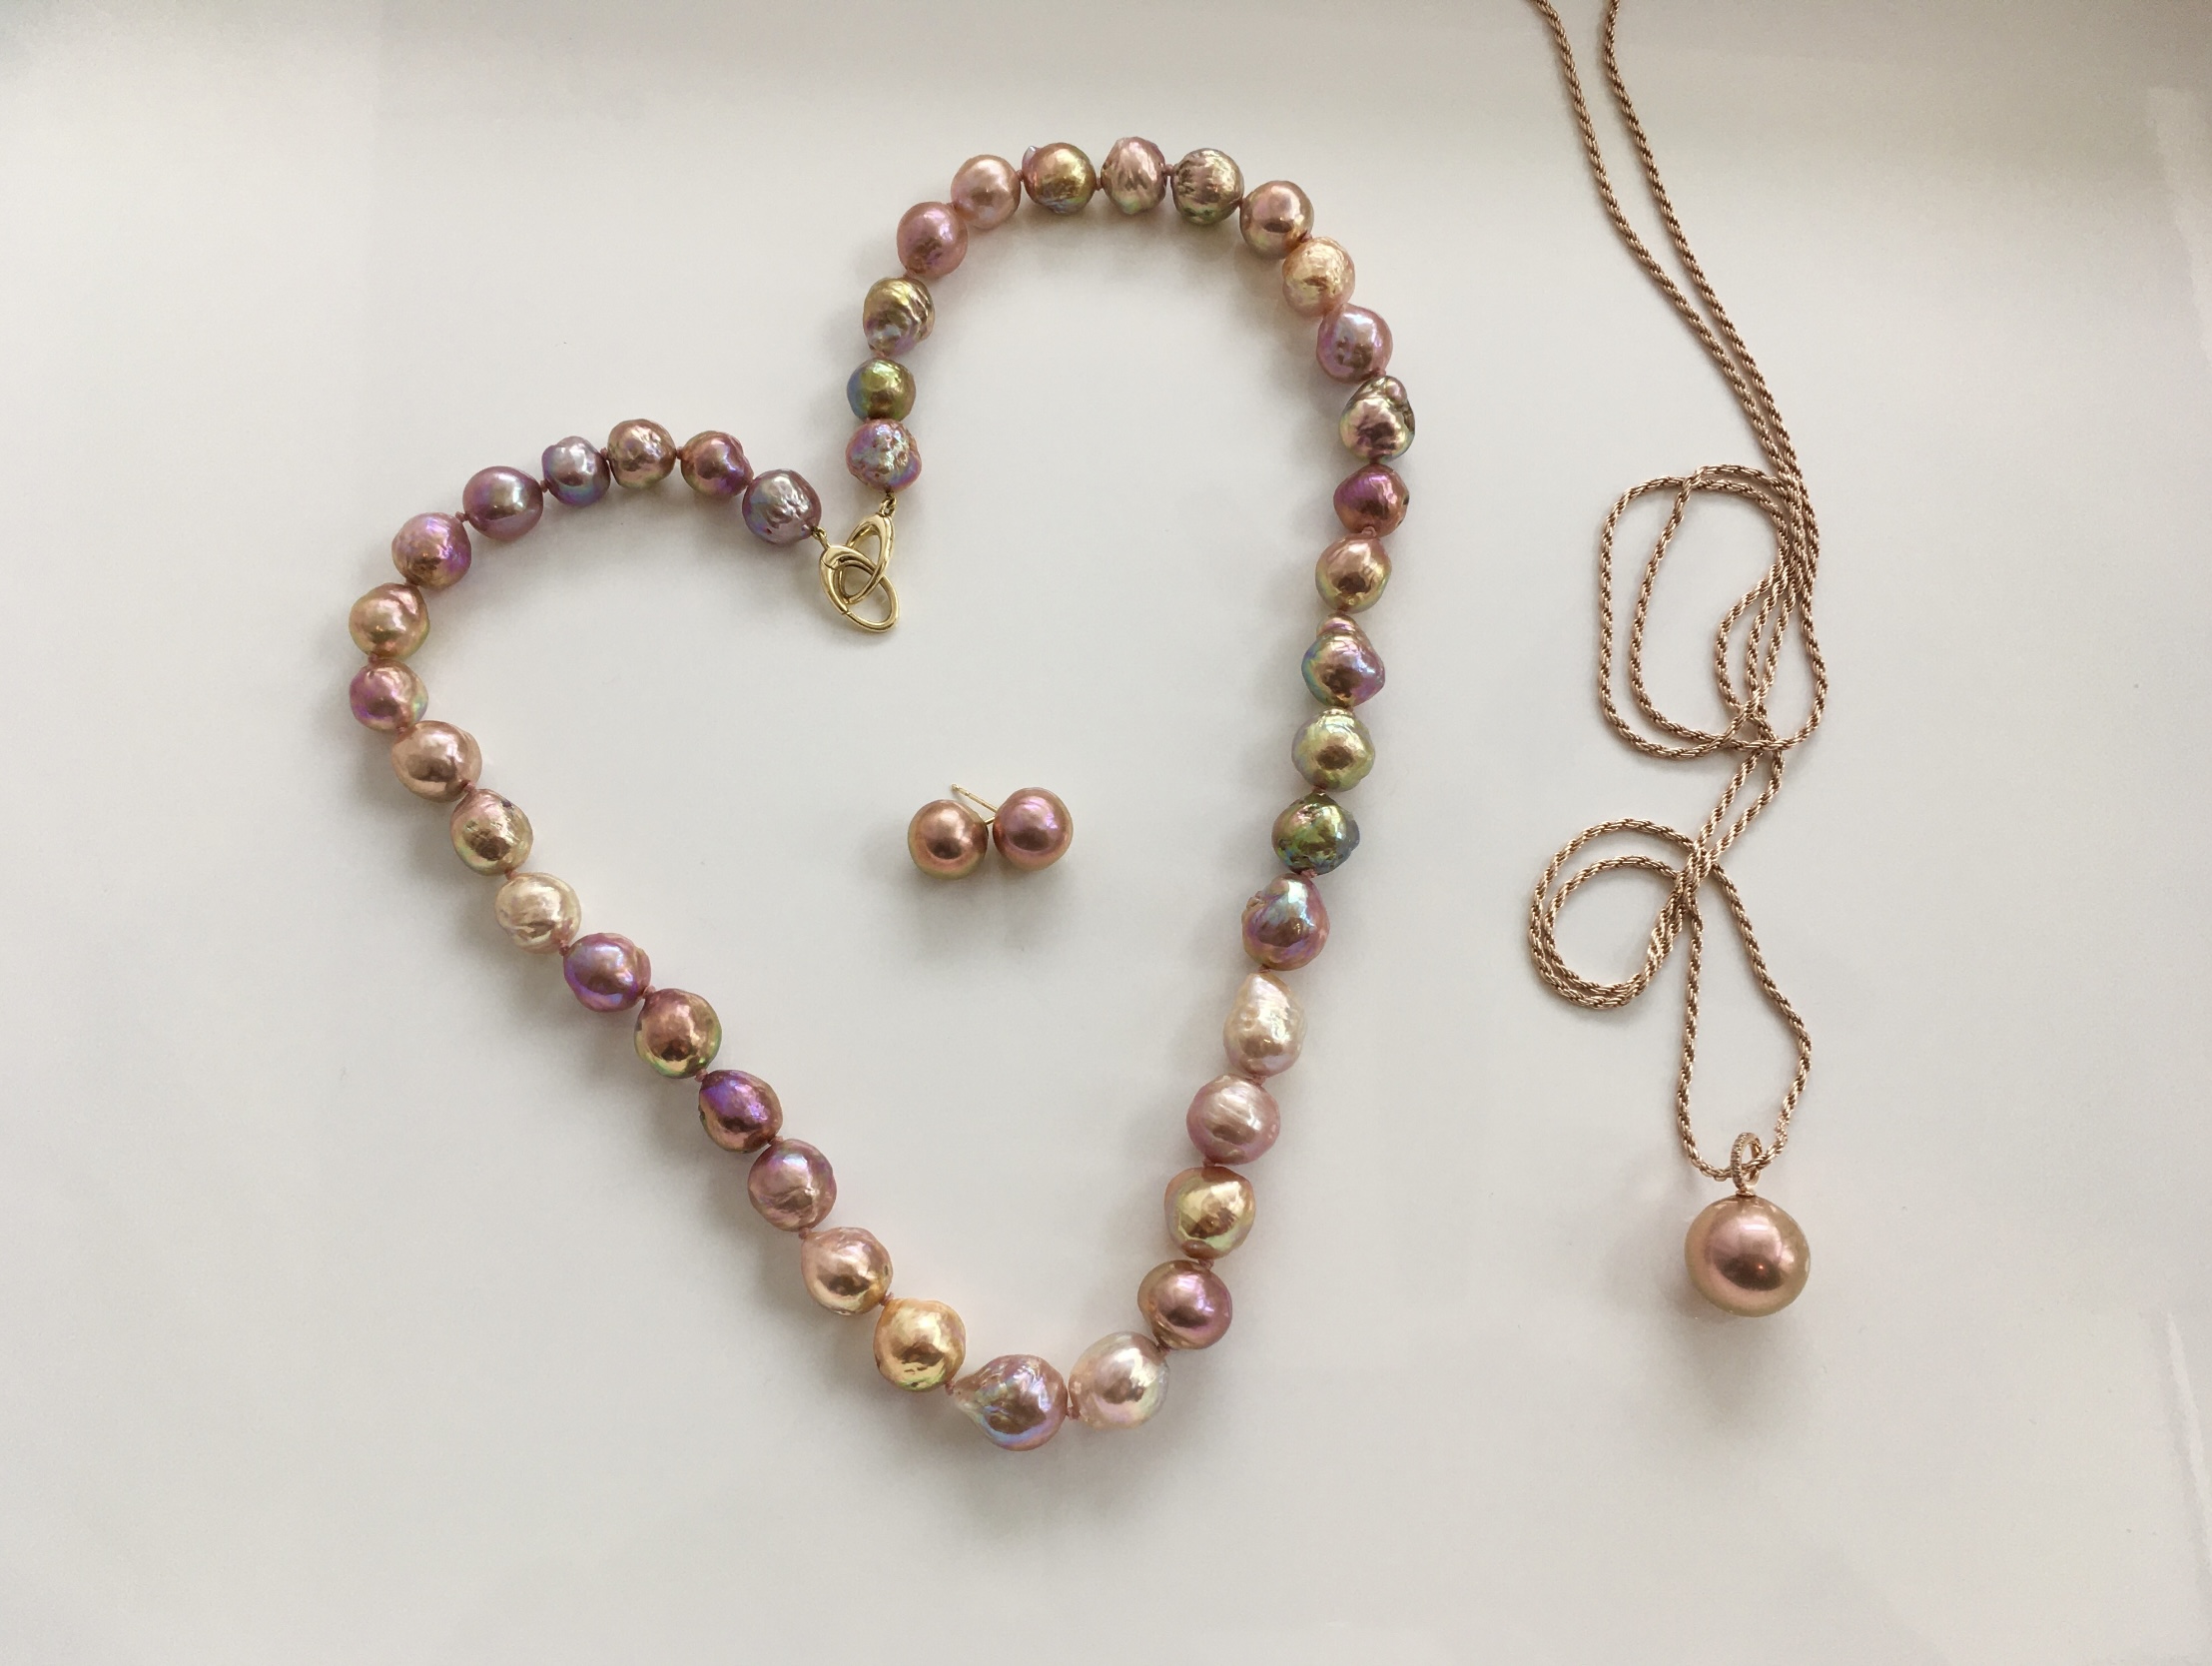 The strand is of Japan Kasumi pearls selected by Sarah for this Top Harvest 2019 strand. The pendant is an Edison pearl Jeremy selected from the Grace Pearl showcase. The studs are metallic freshwater pearls that could easily be mislabeled as either Kasumi or more commonly, Edison pearls, by some vendors.